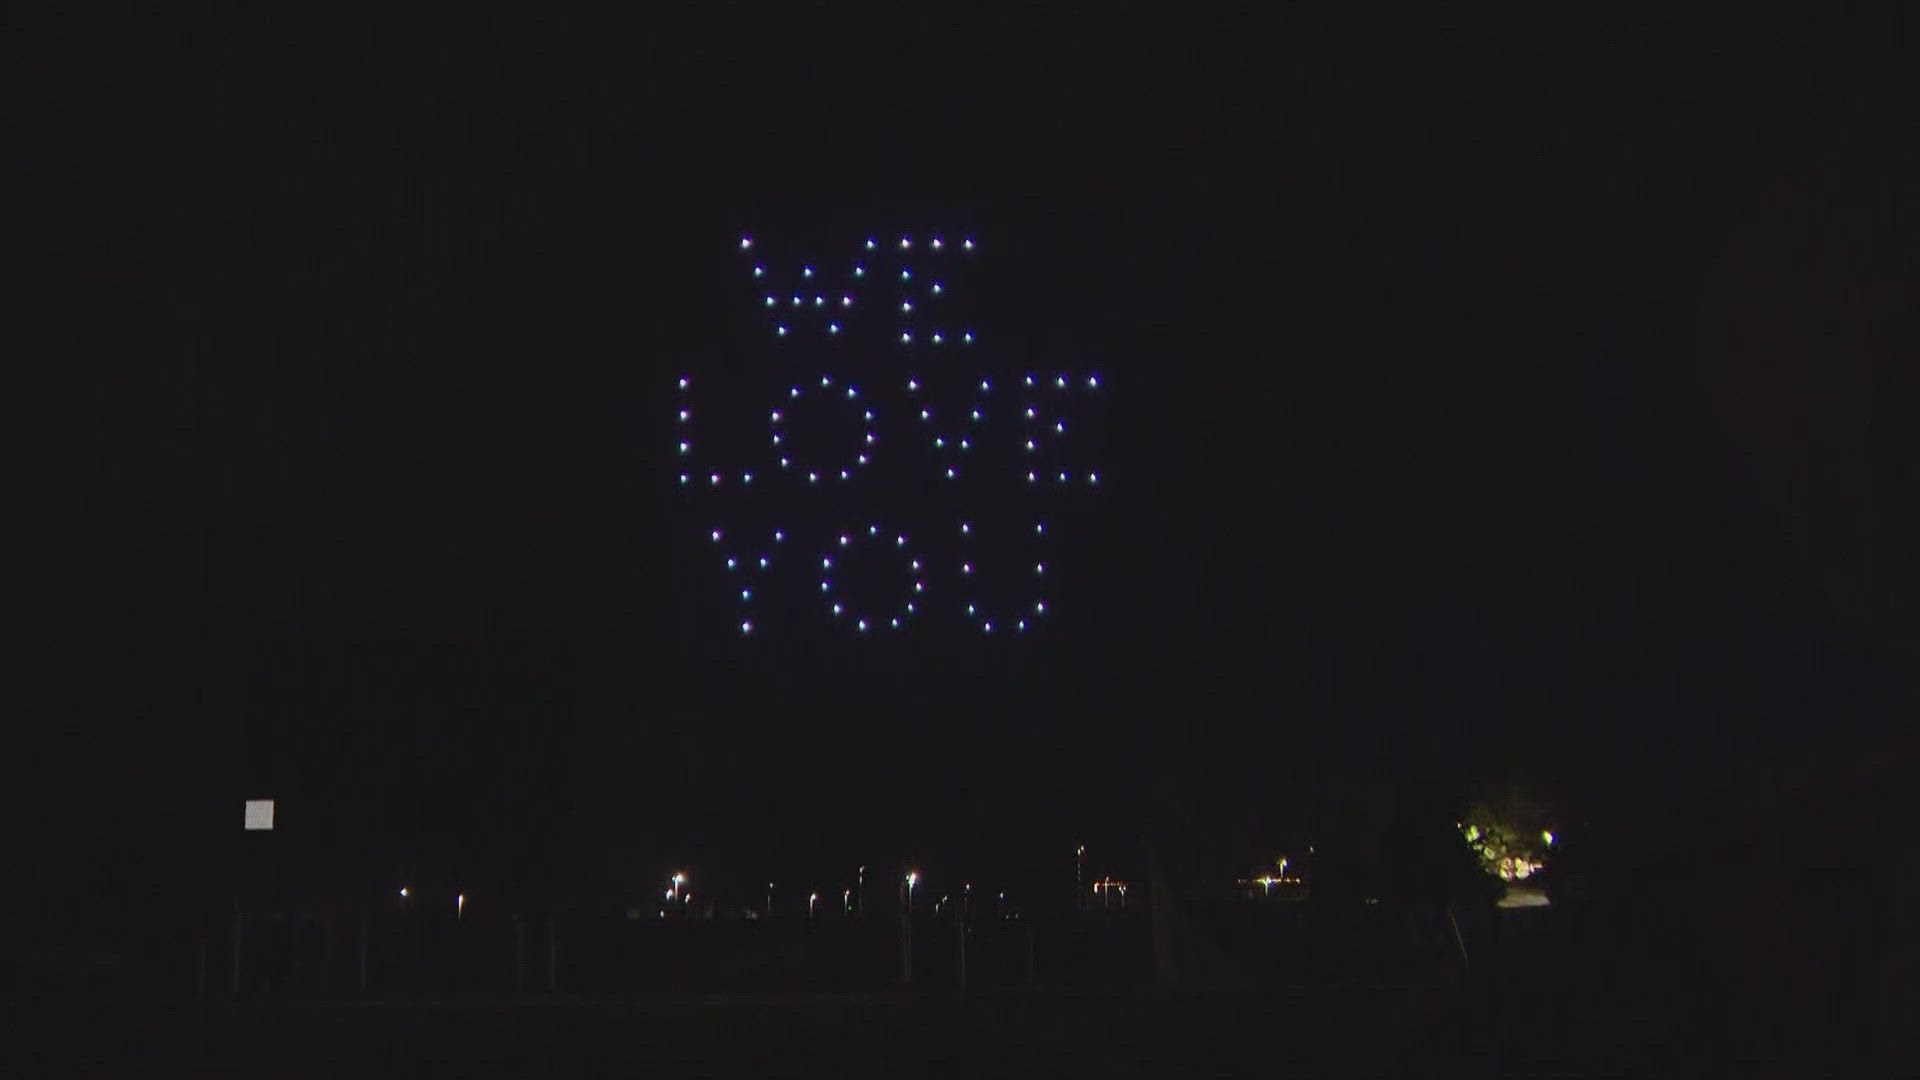 Monday night, 100 drones lit up the sky in Highlands Ranch in honor of 7-year-old Genevieve, who's battling leukemia.